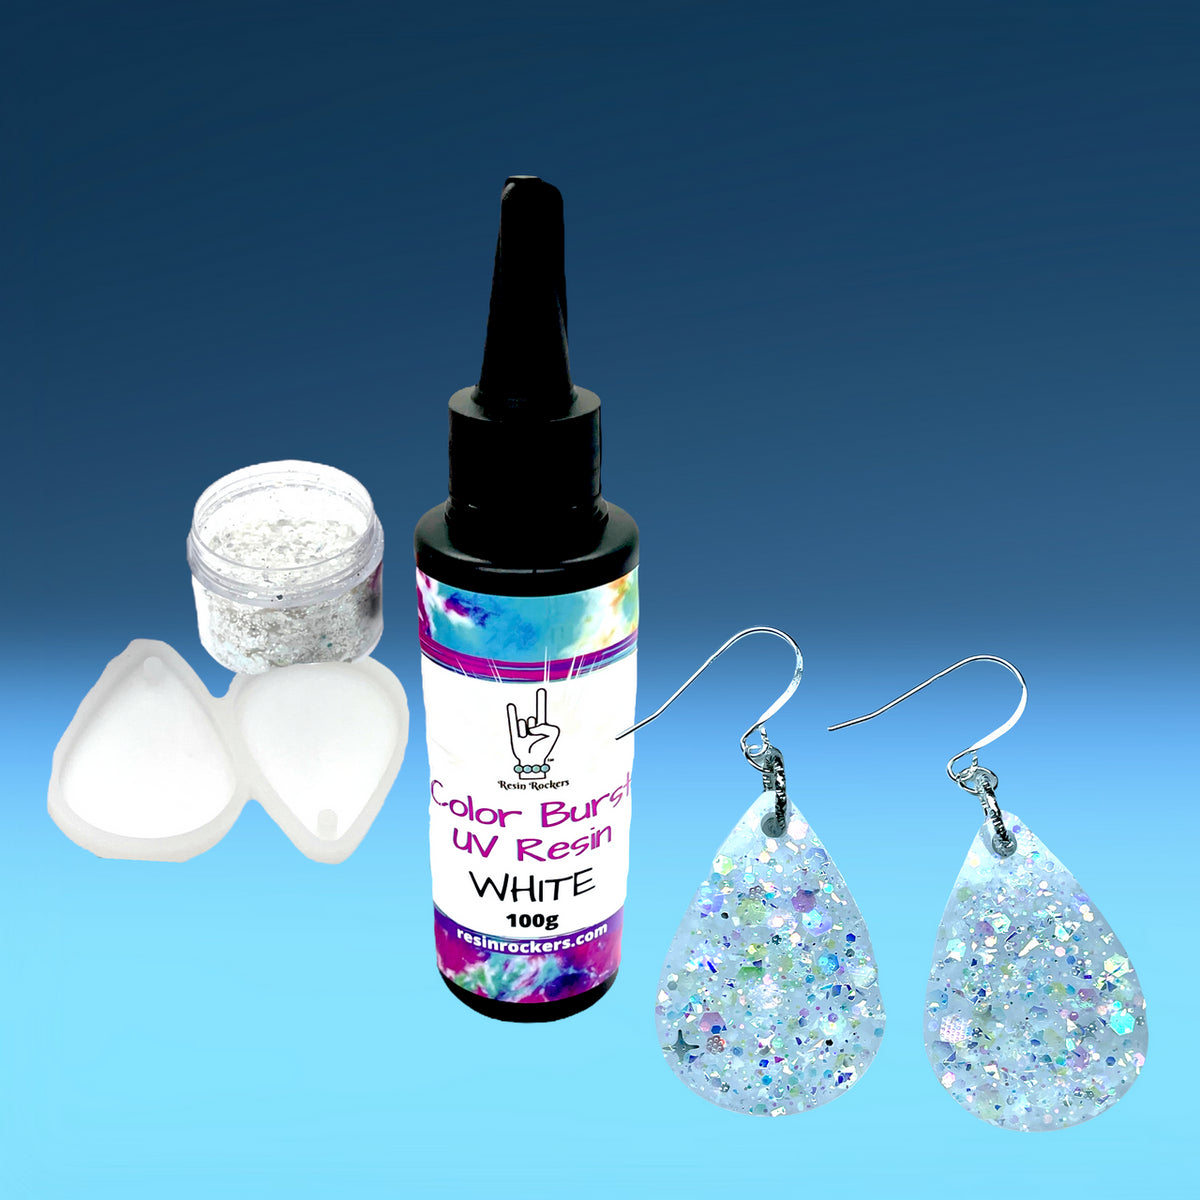 White Color Burst UV Resin Earring Bundle With Mold and Glitter